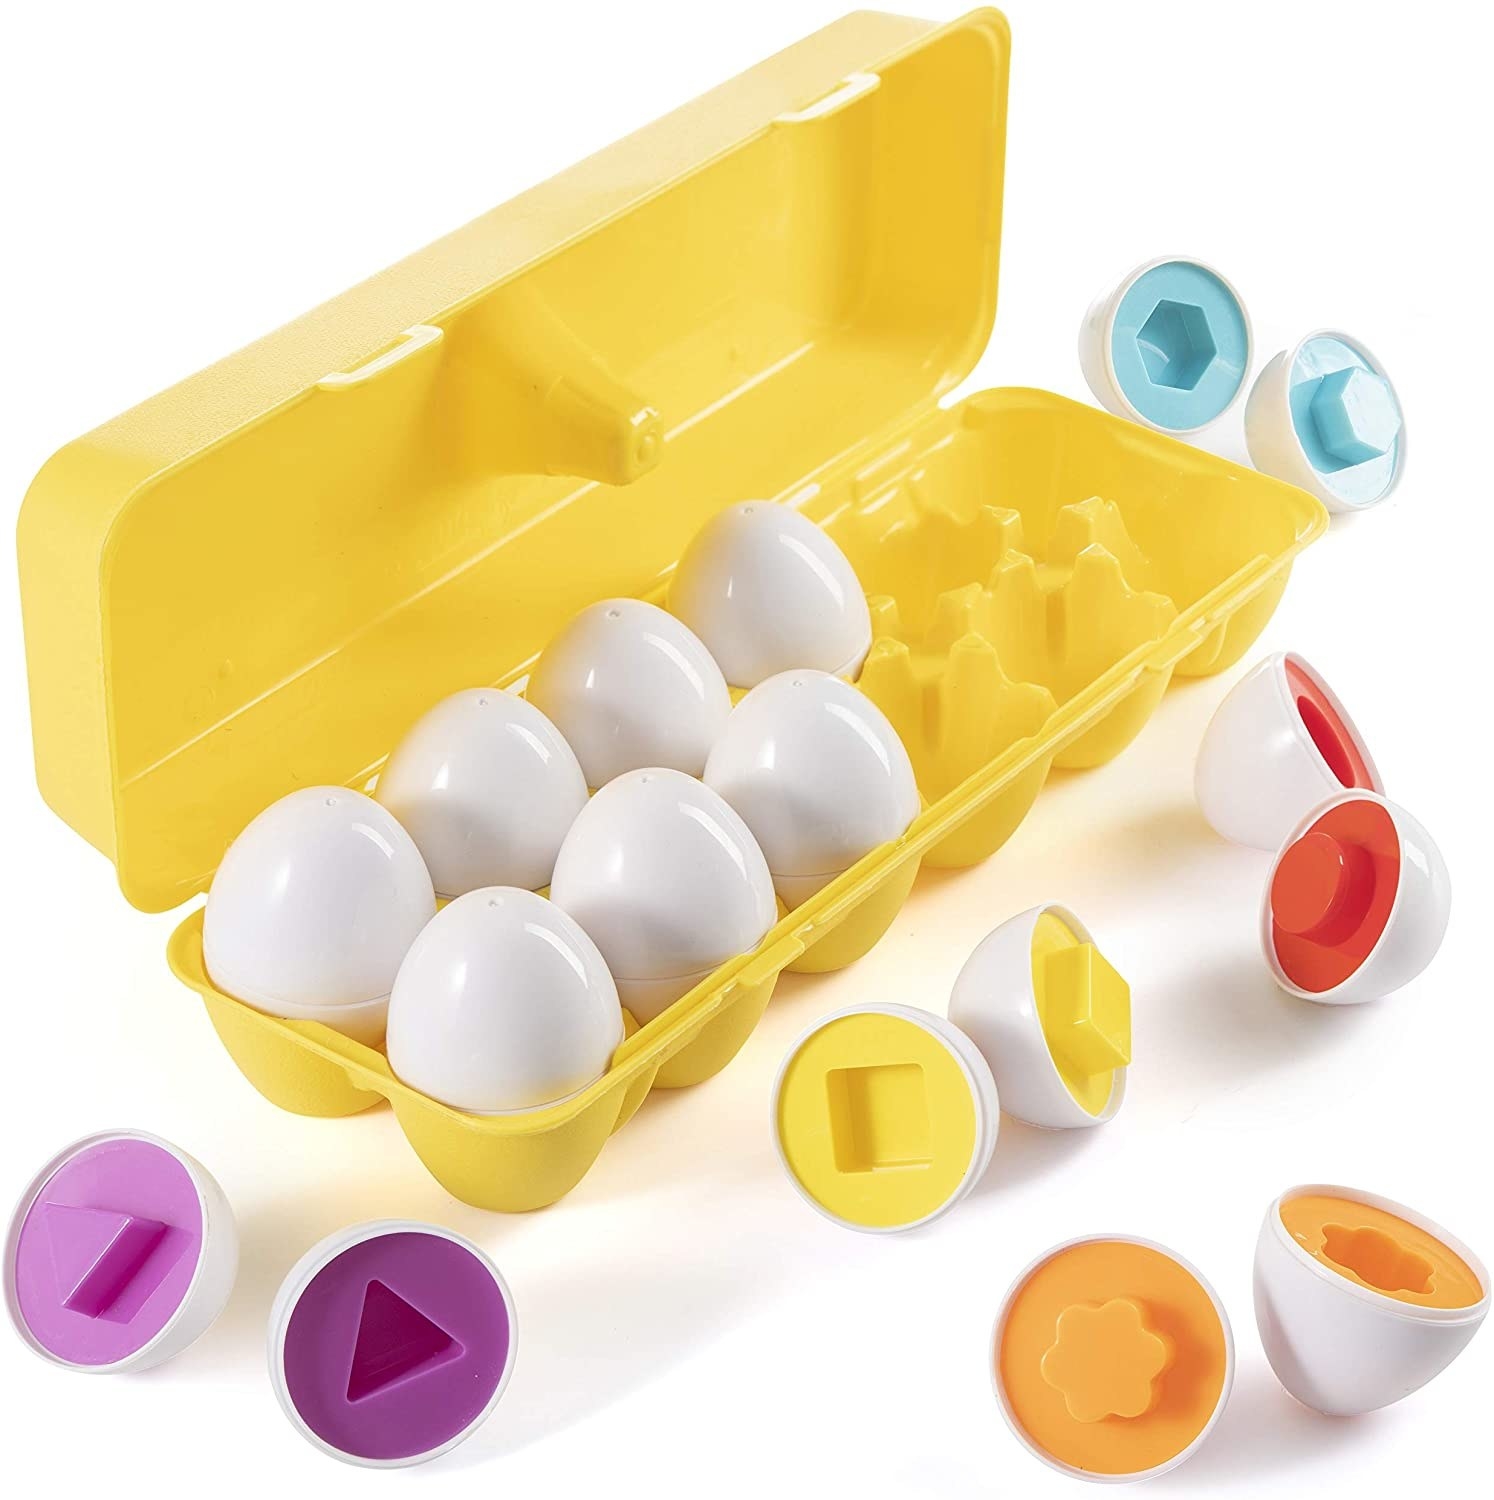 a yellow egg carton filled with toy eggs that break in half to reveal different shapes and colors inside